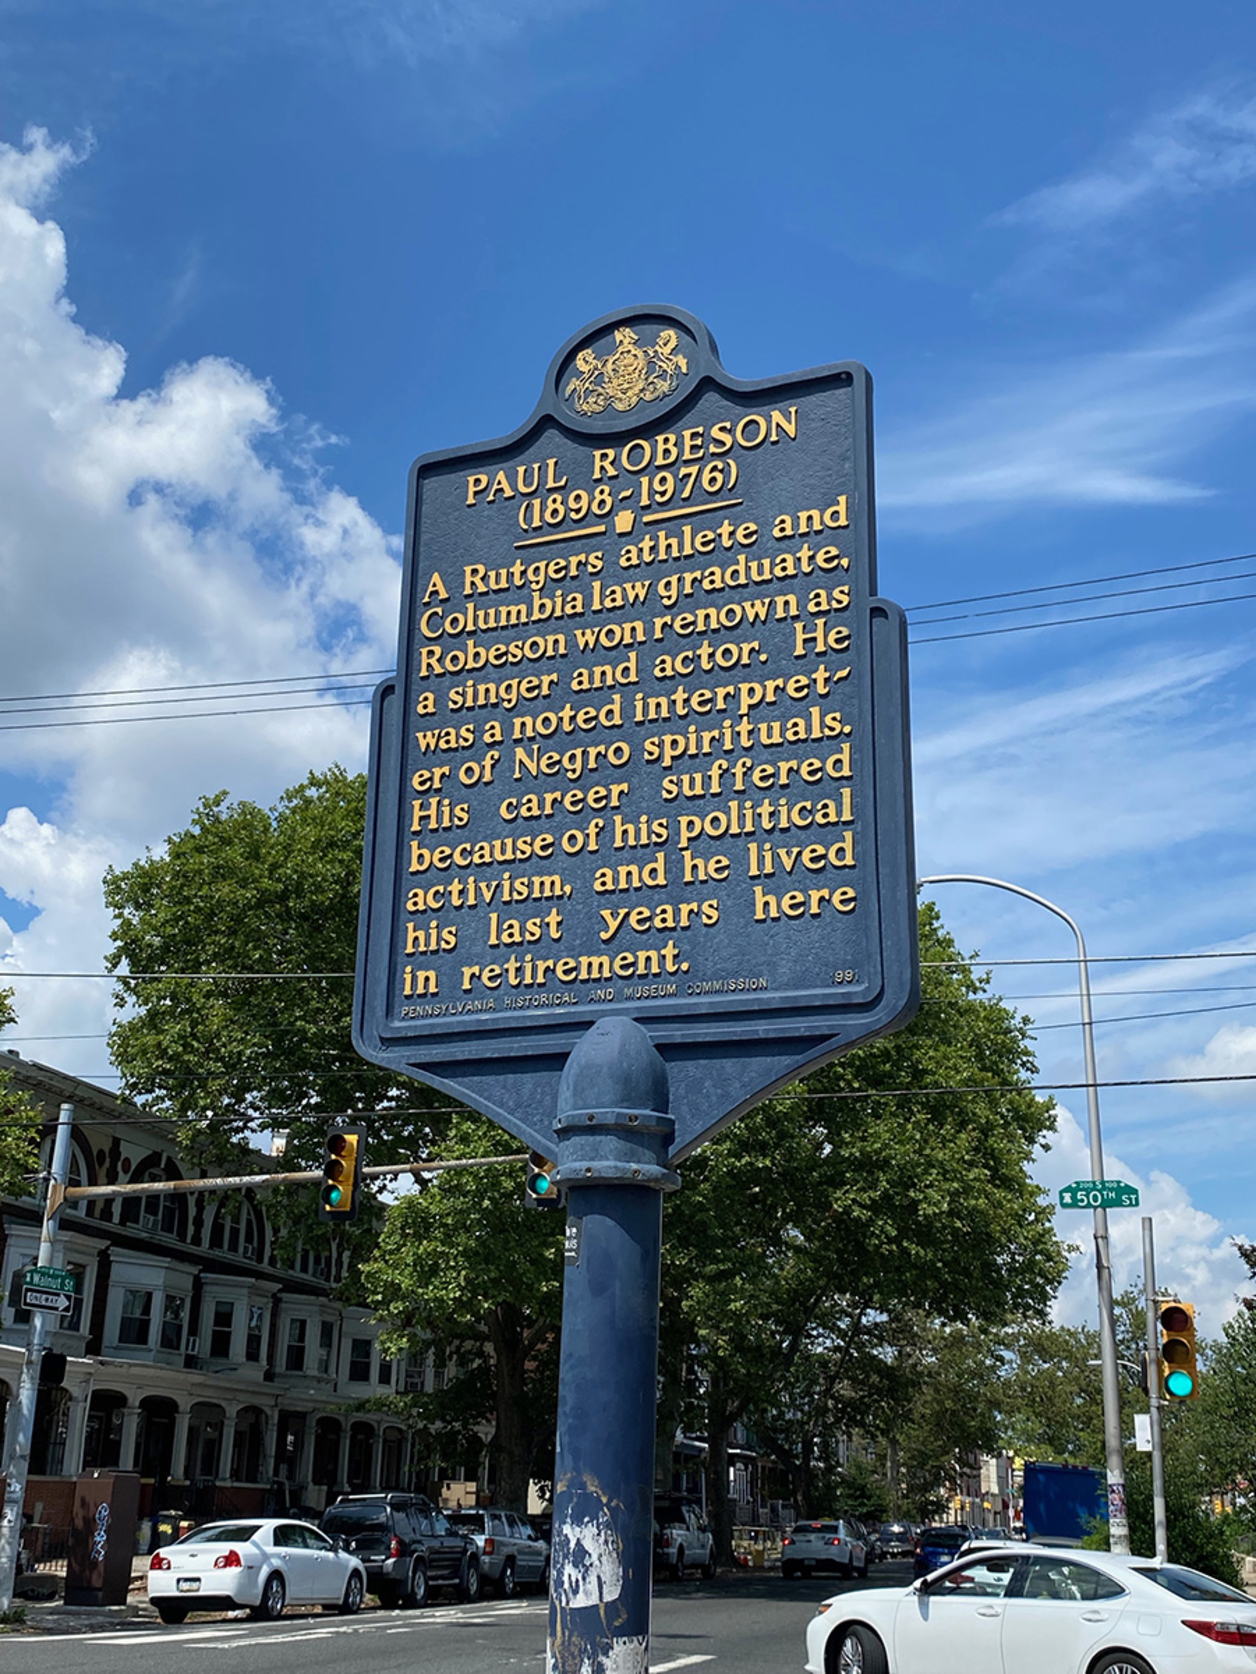 A cast-aluminium historic marker of Paul Robeson. Photo by Pamela W. Hawkes